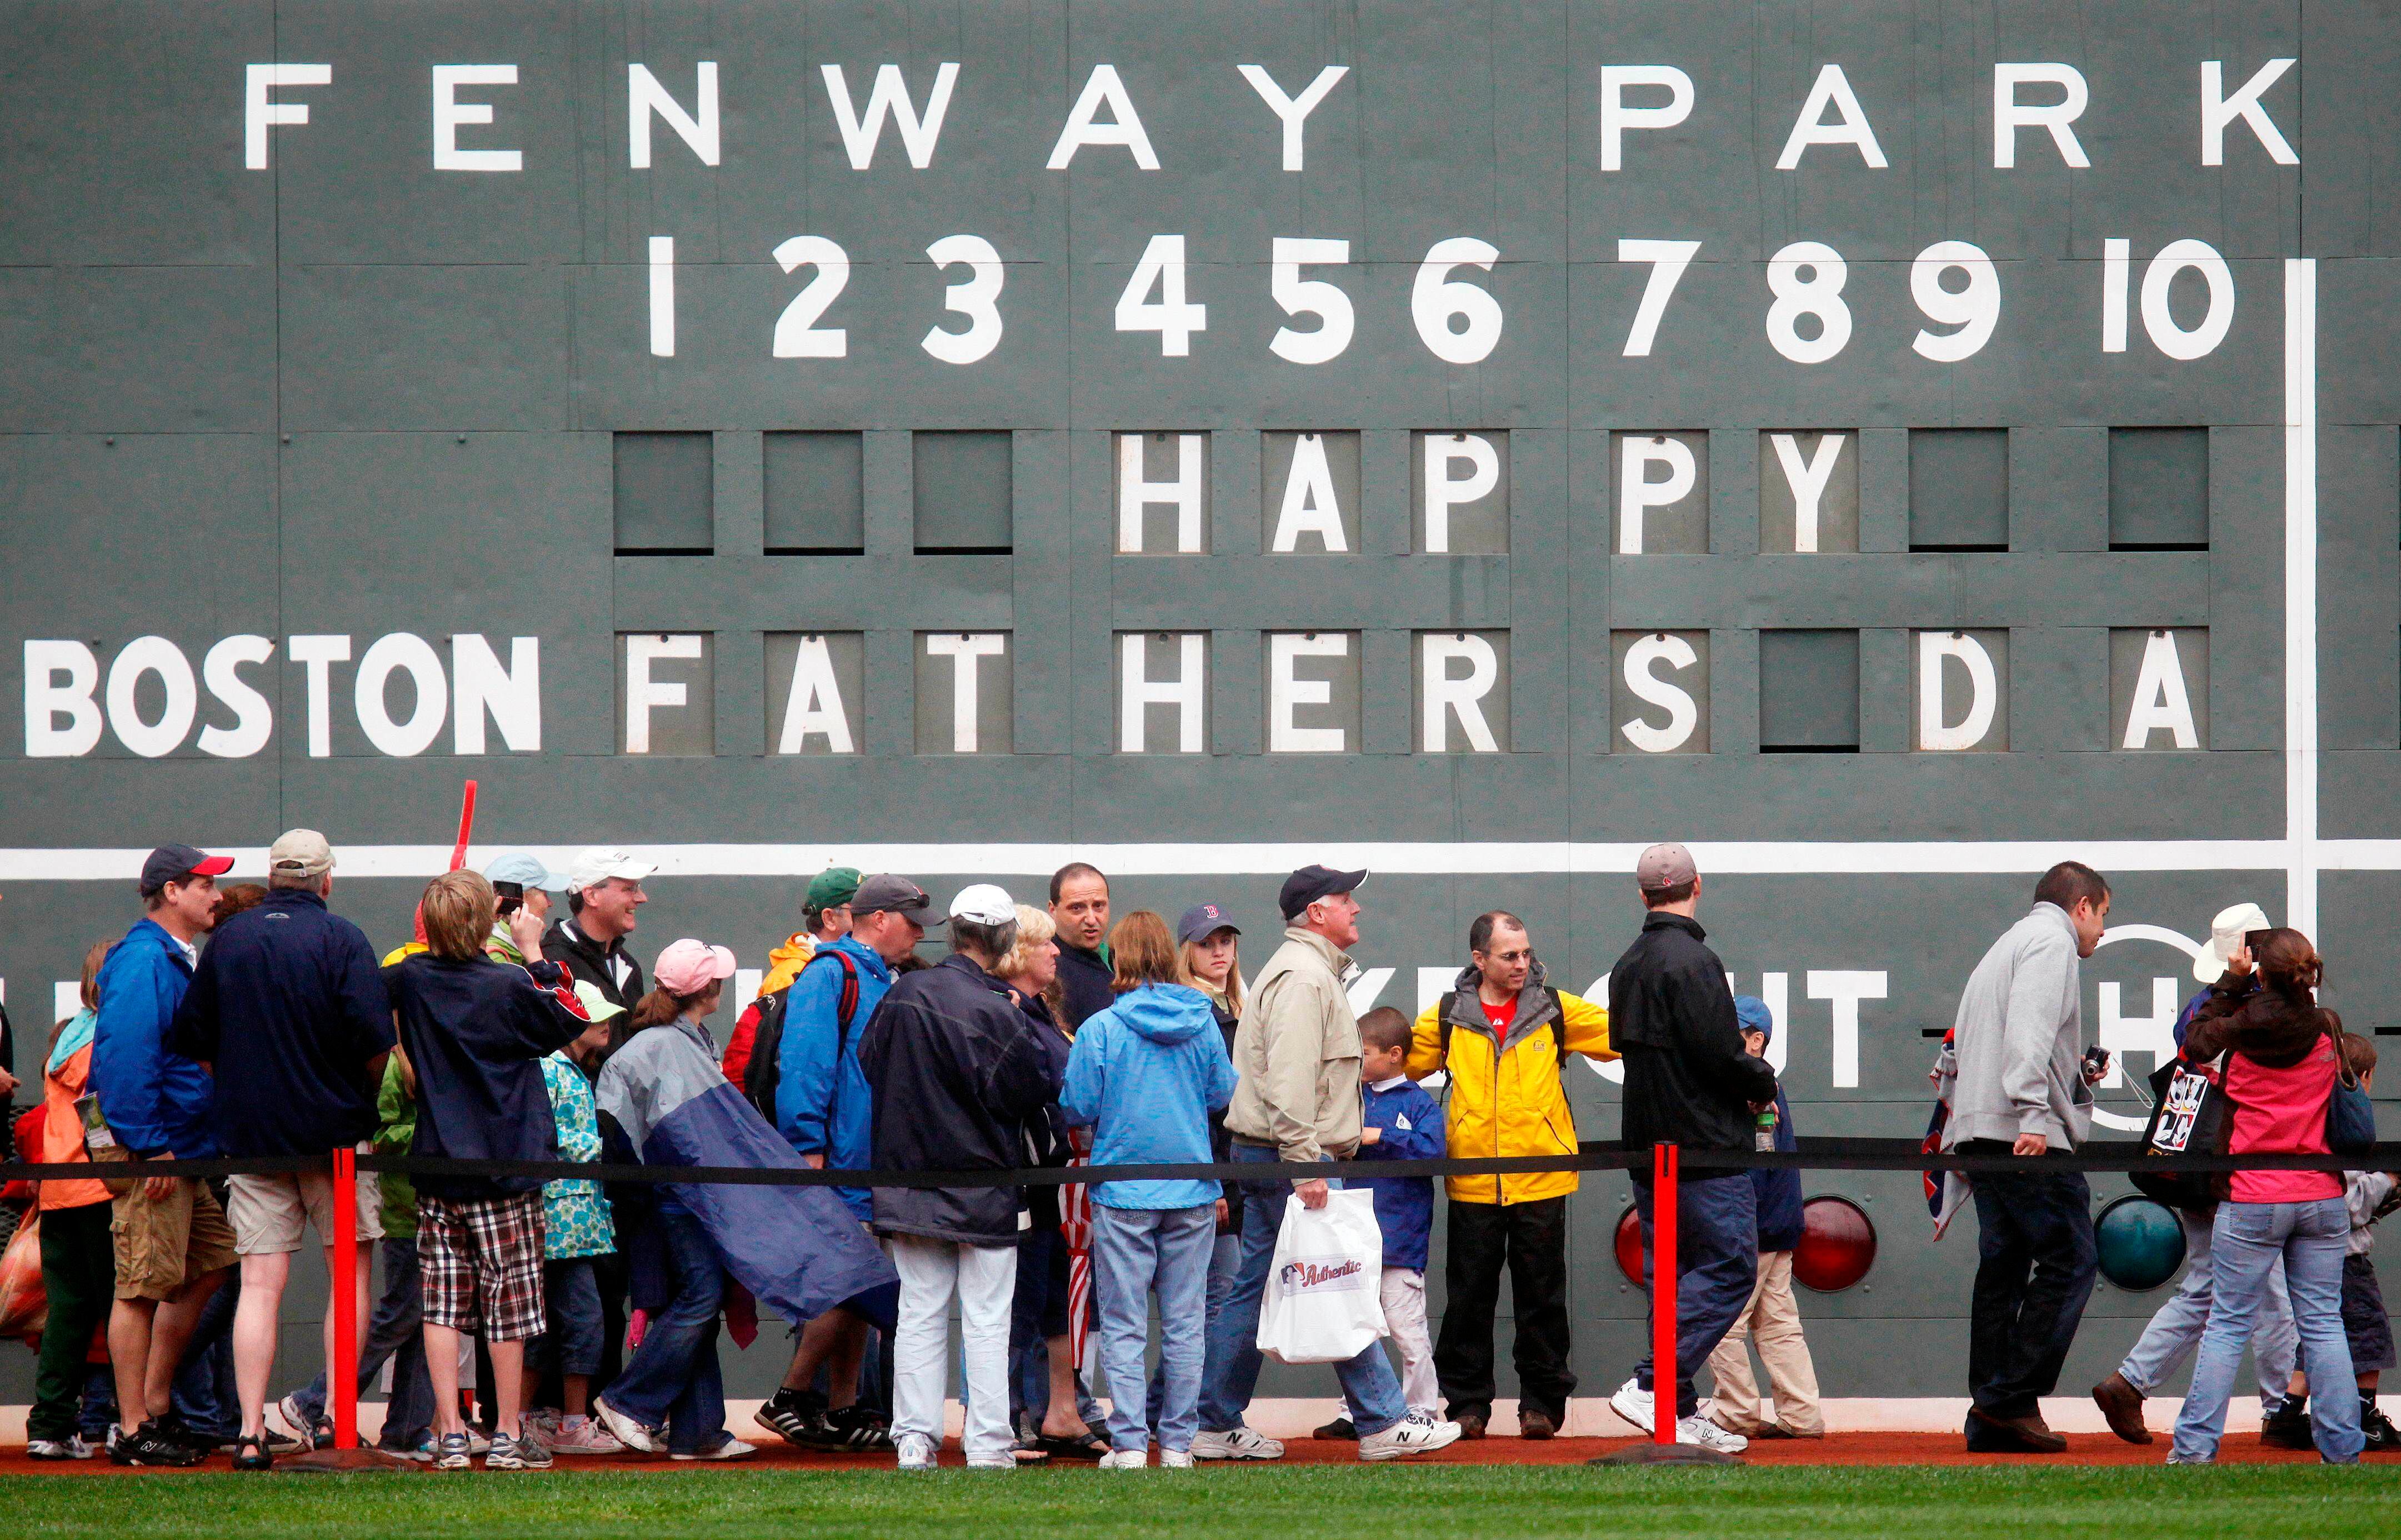 Boston Red Sox - Happy Father's Day to all the dads of Red Sox Nation!